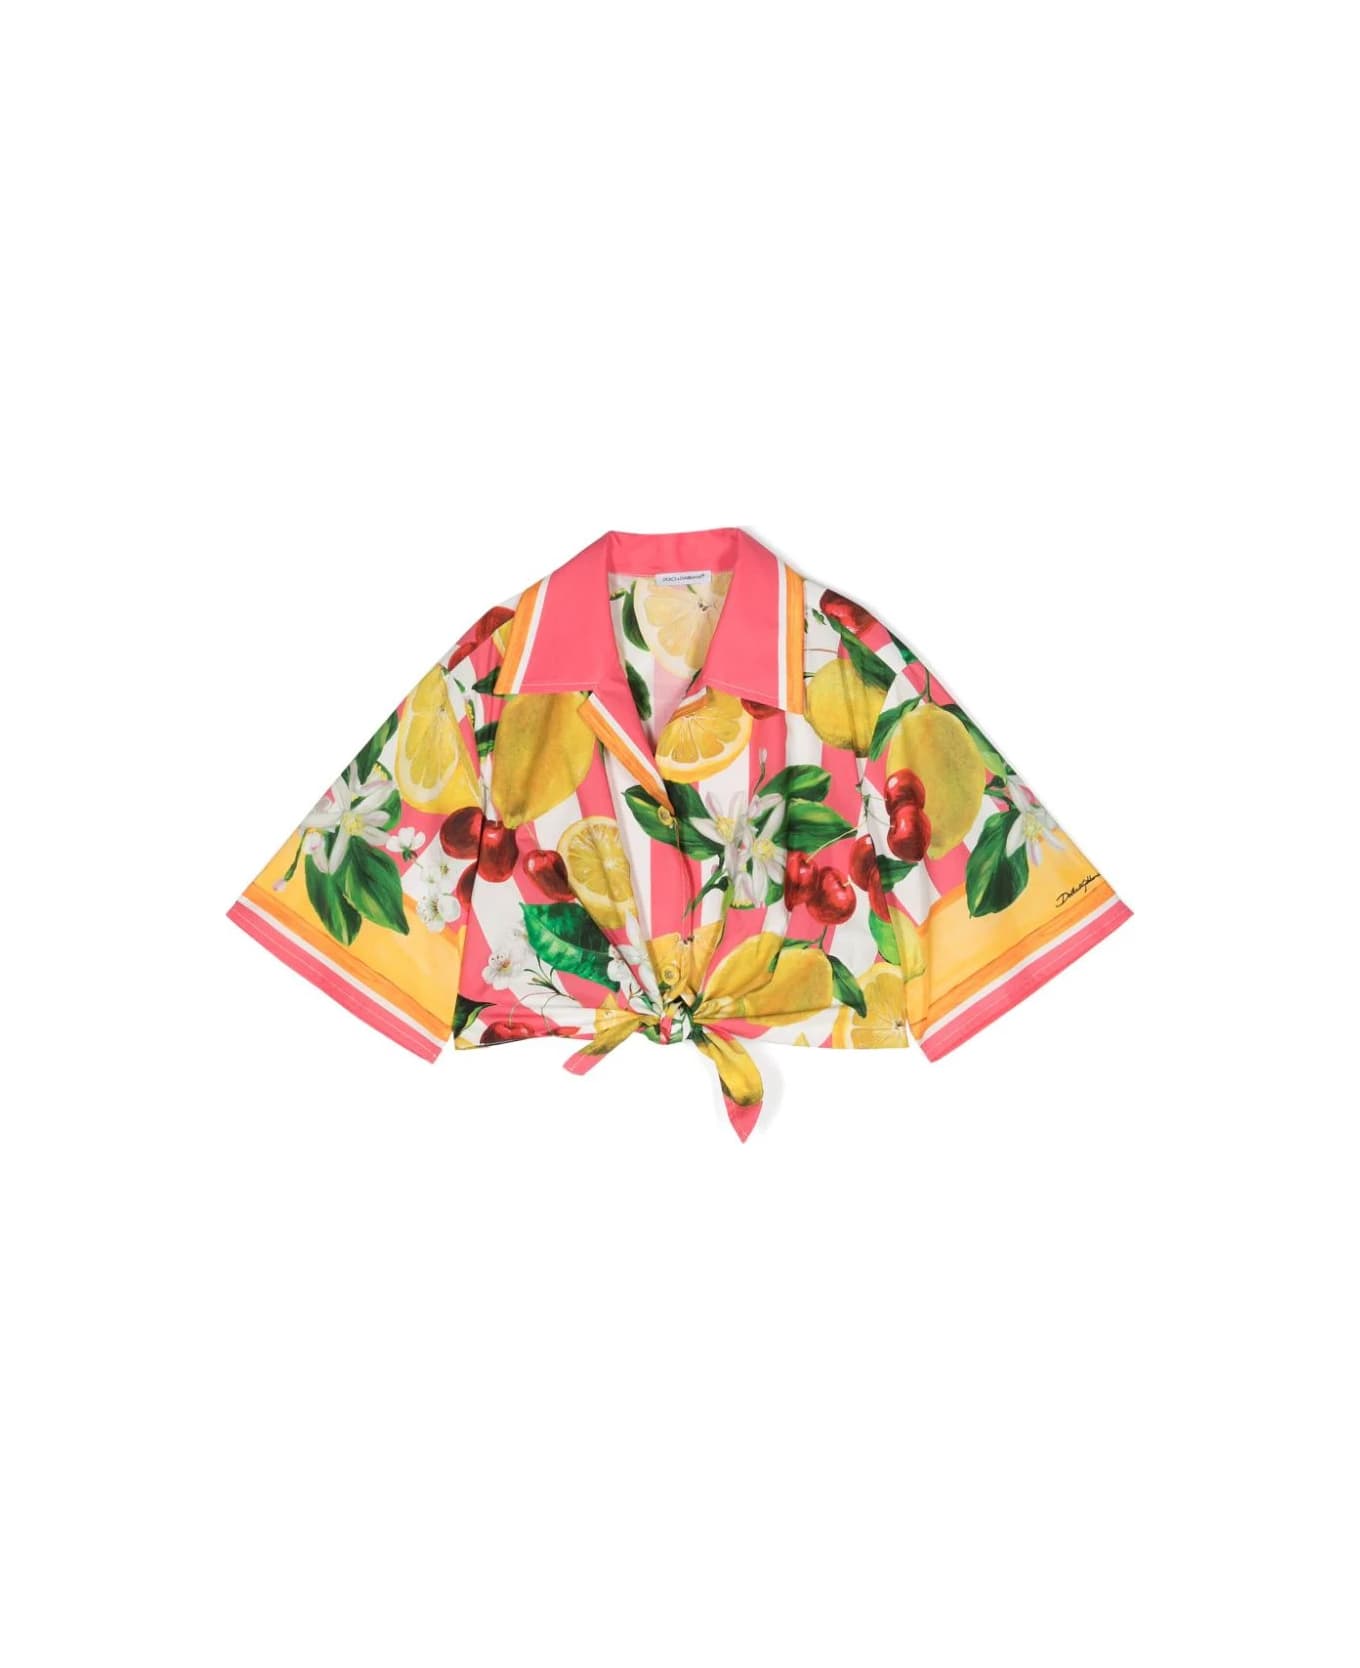 Dolce & Gabbana Cropped Shirt With Lemon And Cherry Print - Multicolour シャツ